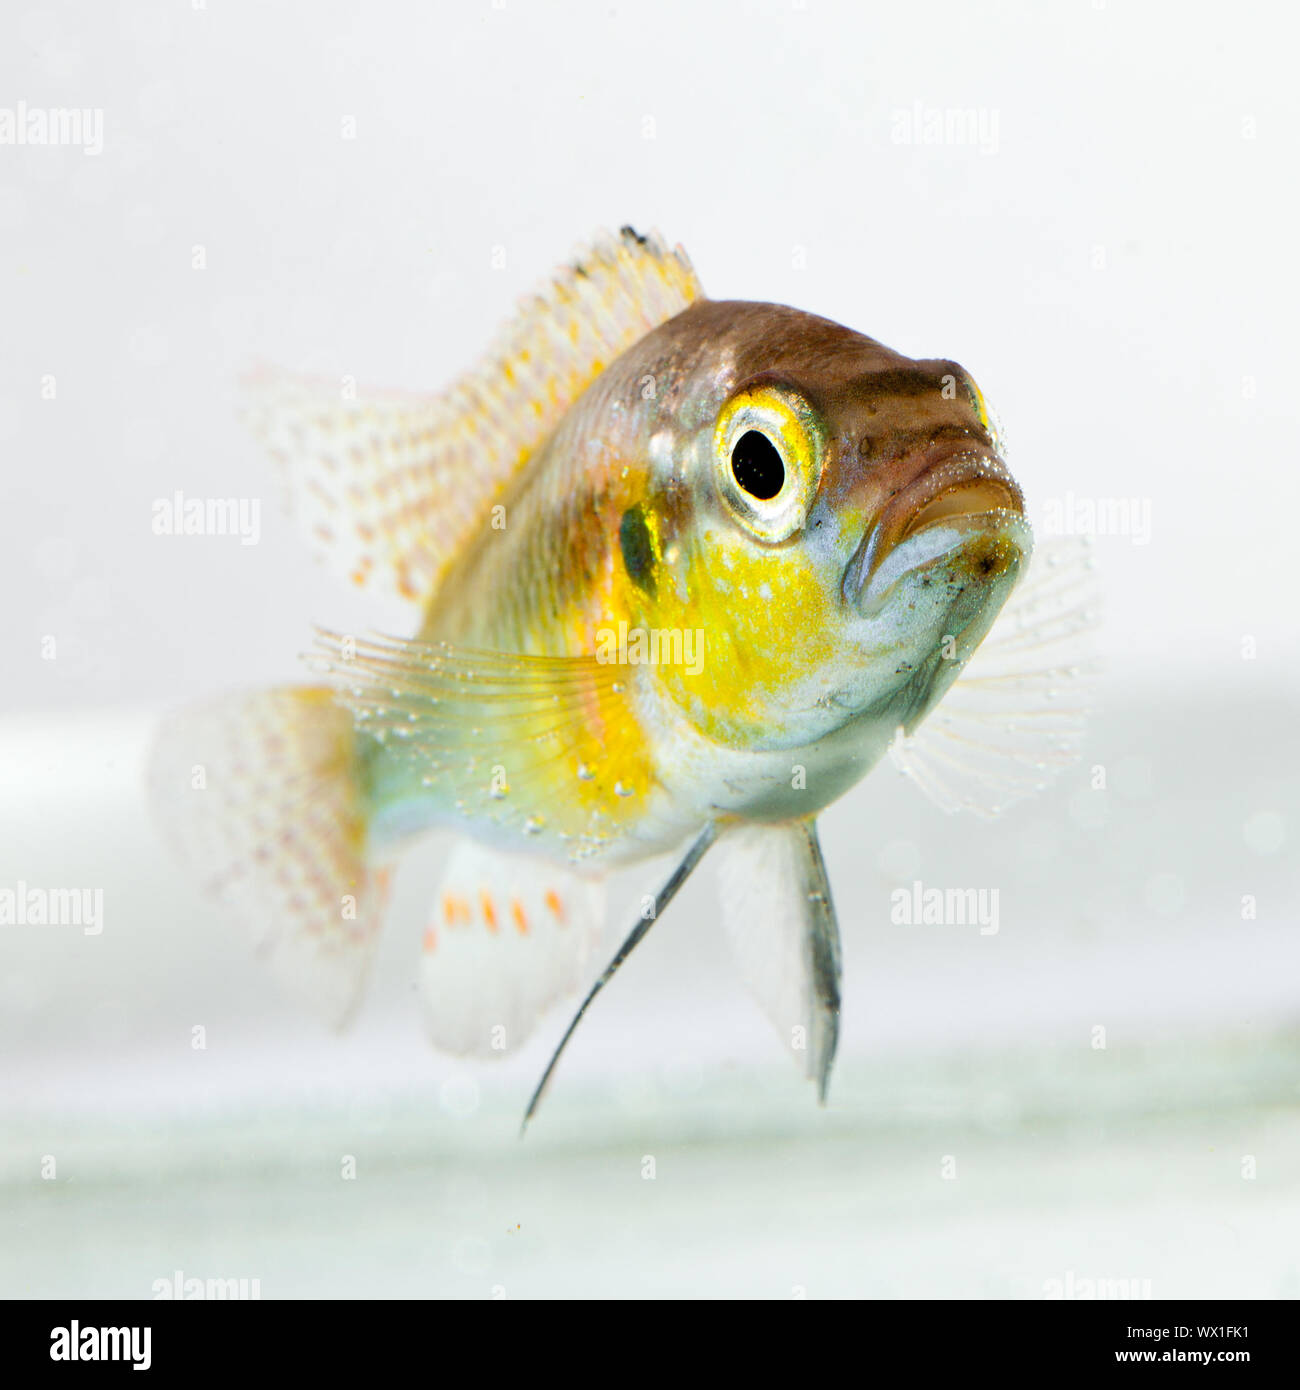 cichlid fish (Geophagus surinamensis) on a white background Stock Photo